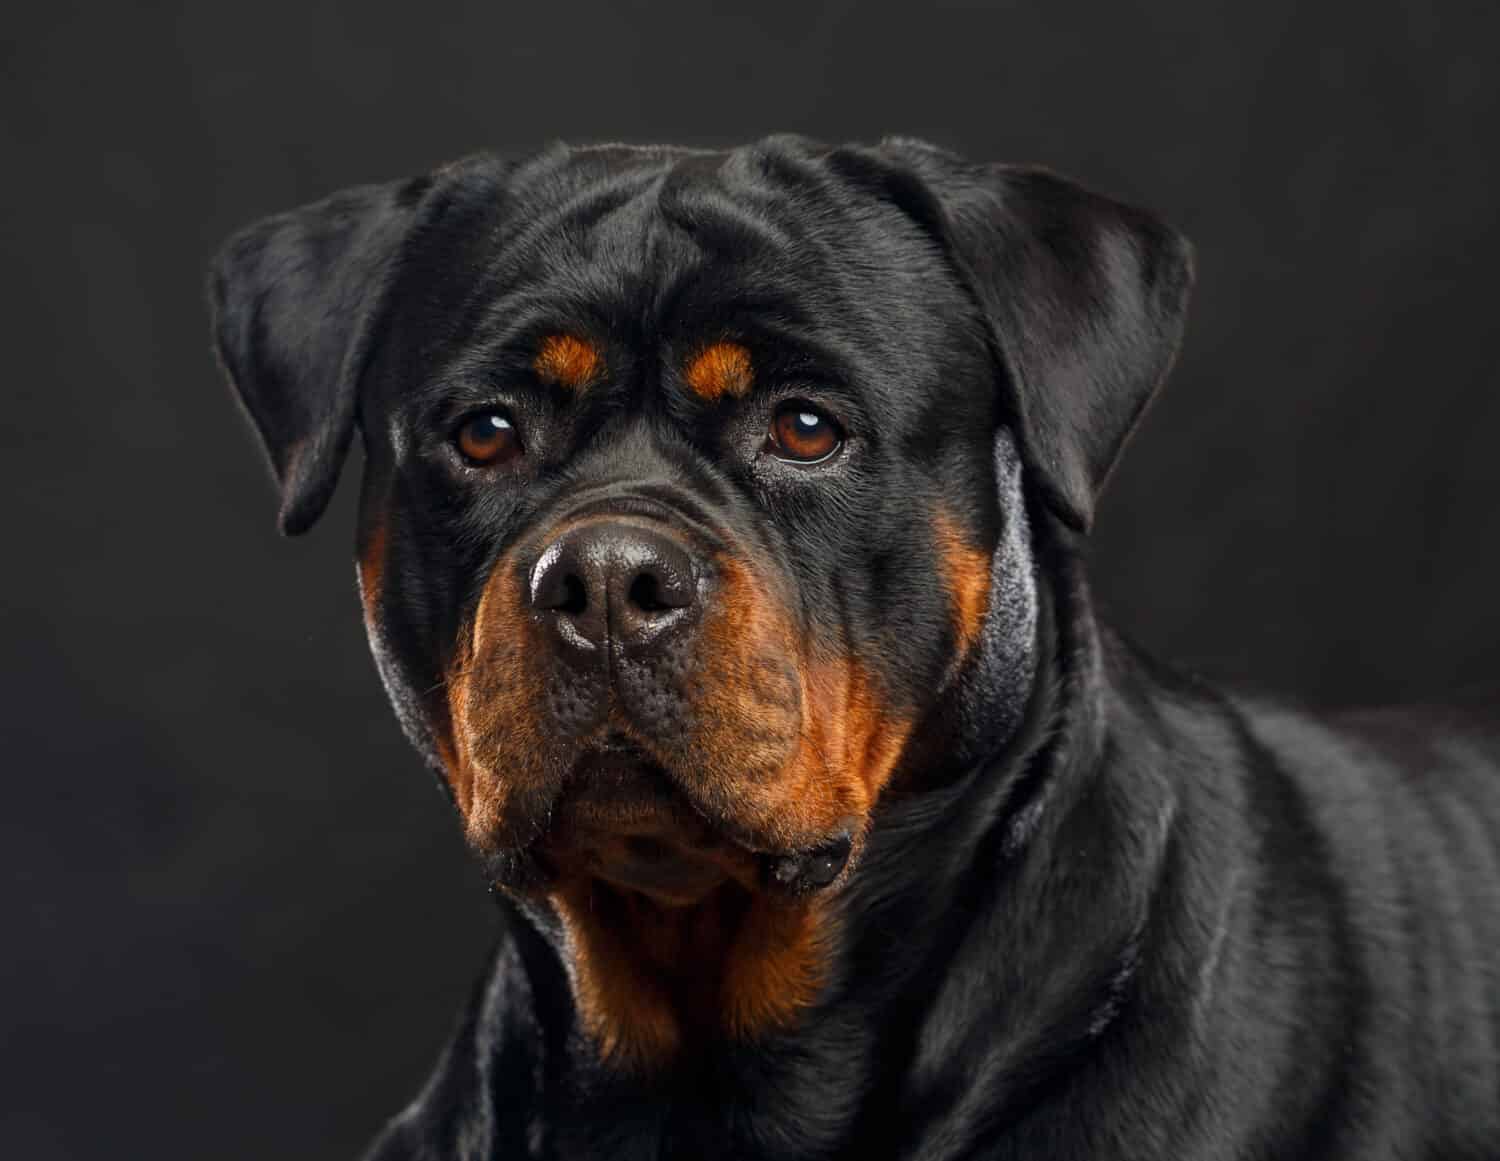 how much do rottweiler dogs cost?